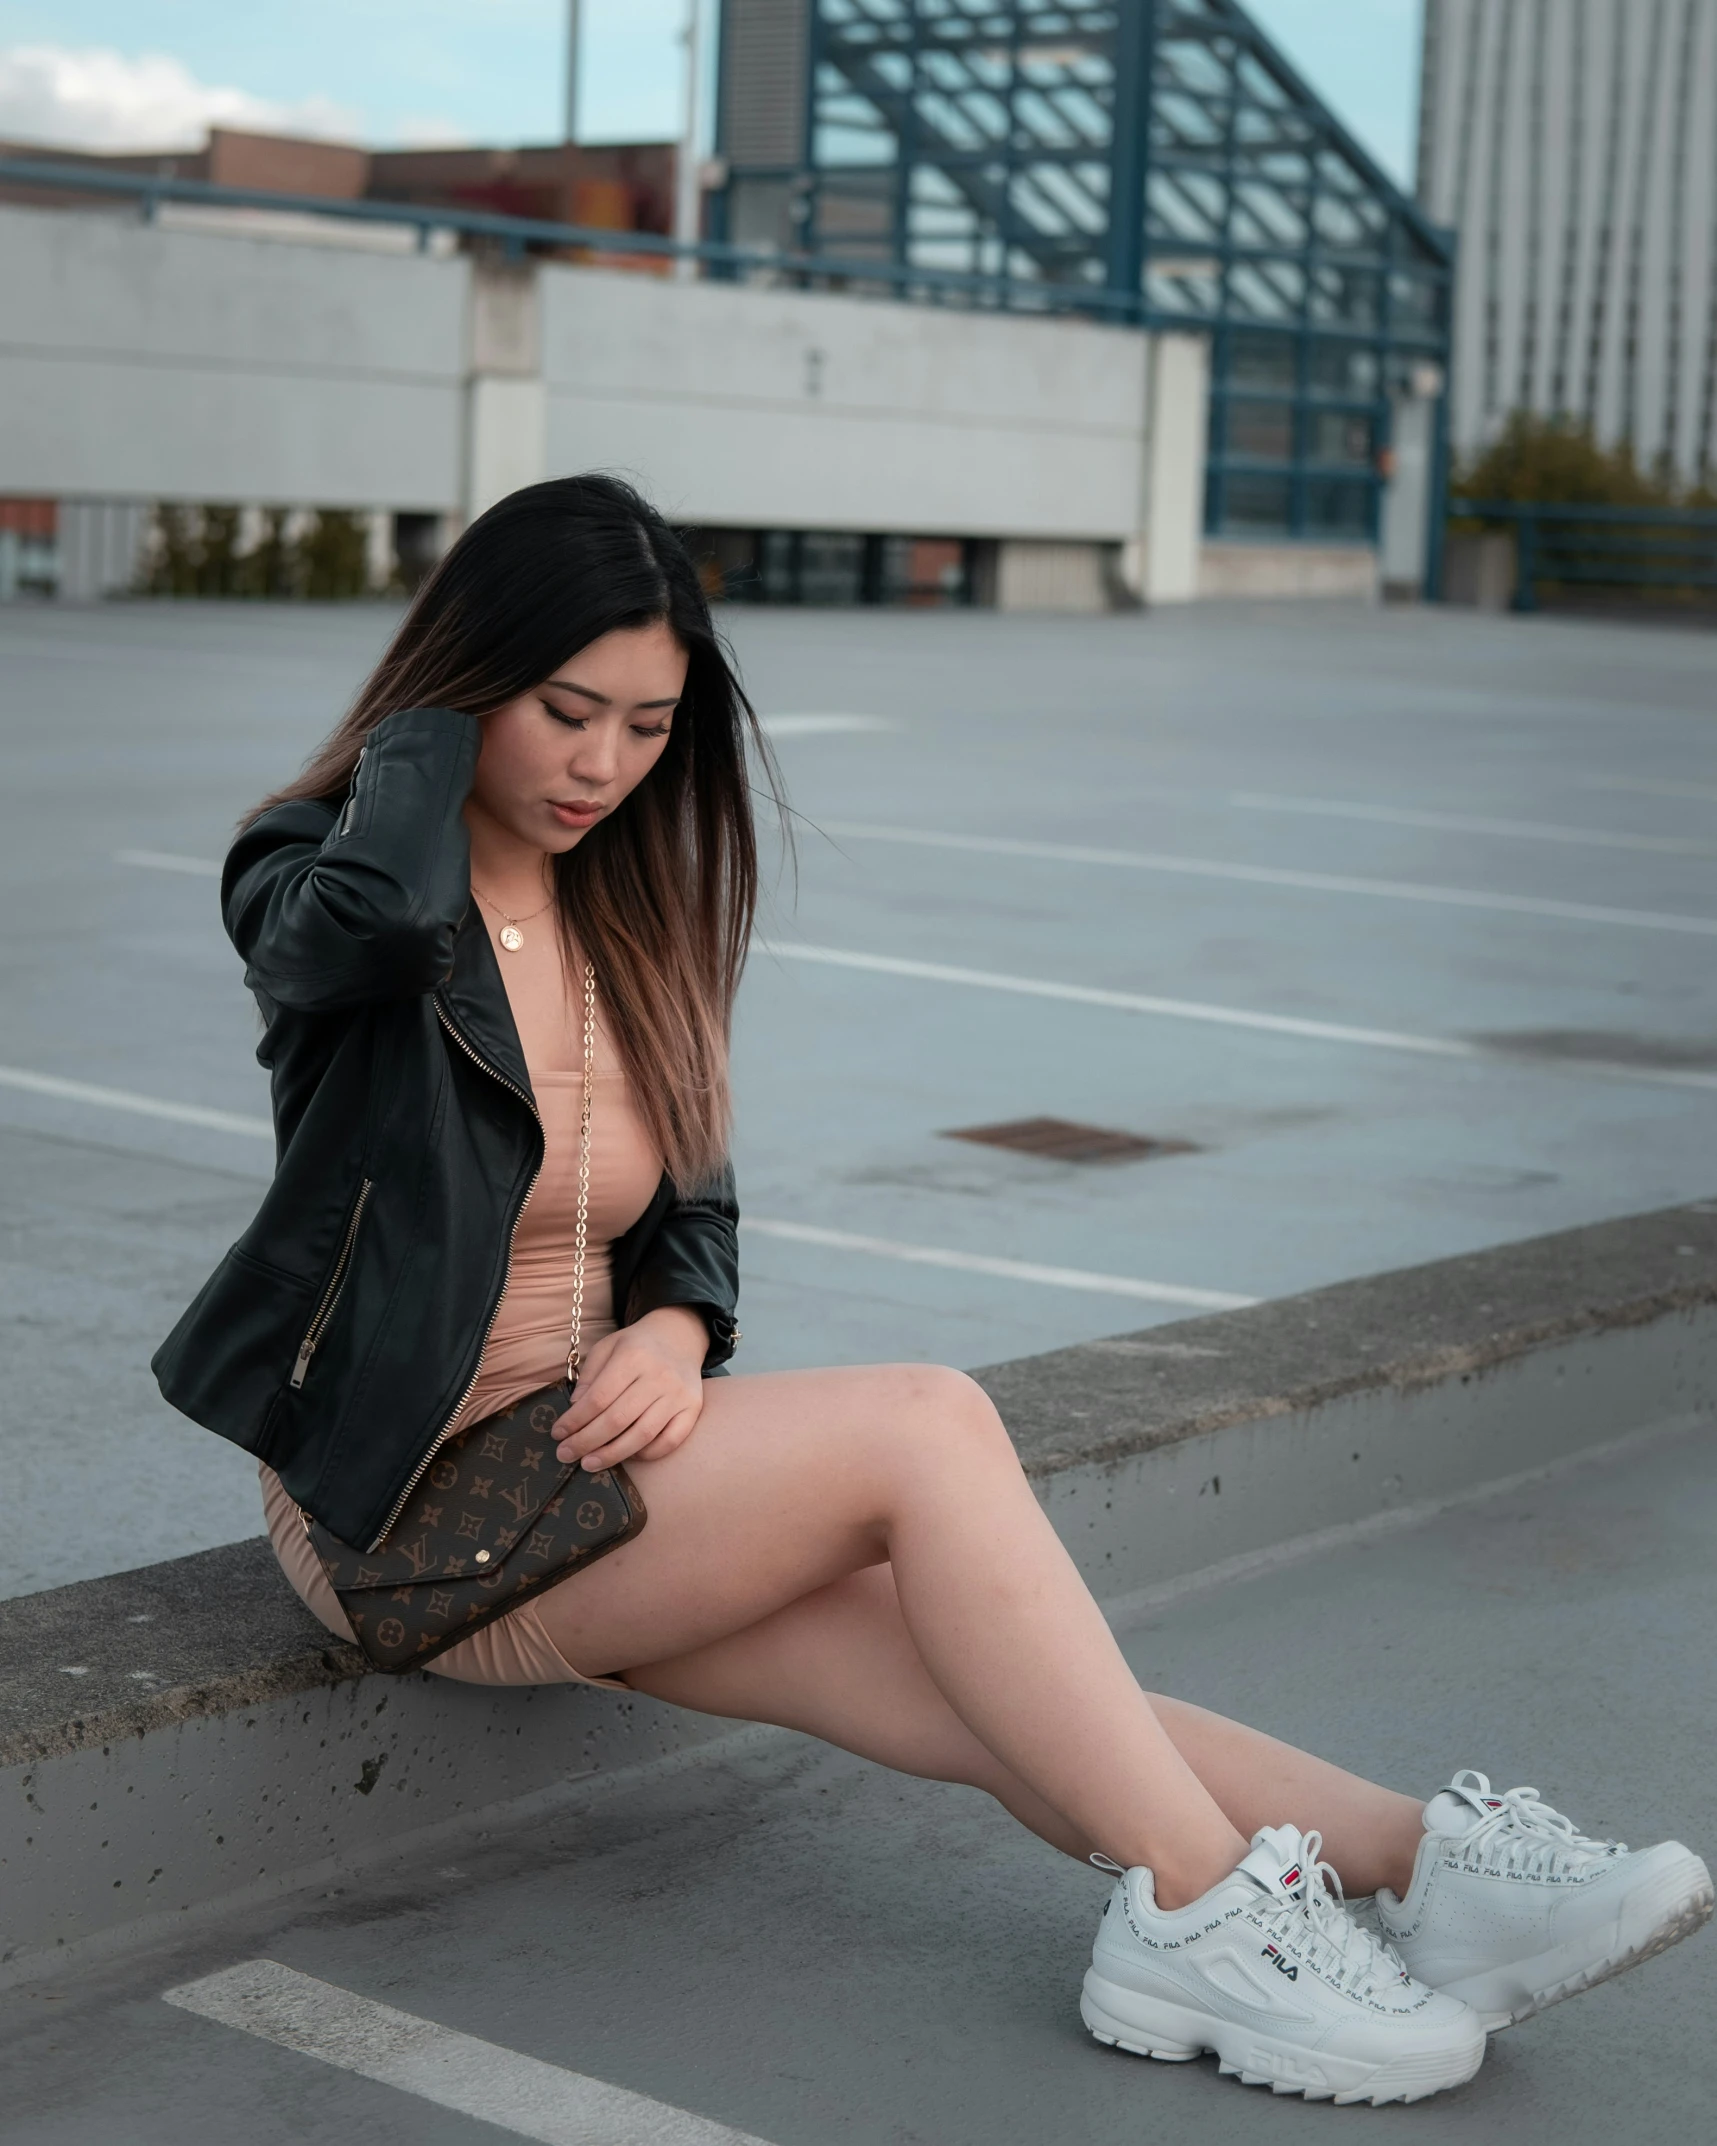 a woman in an open shirt and sneakers sitting next to a parking lot